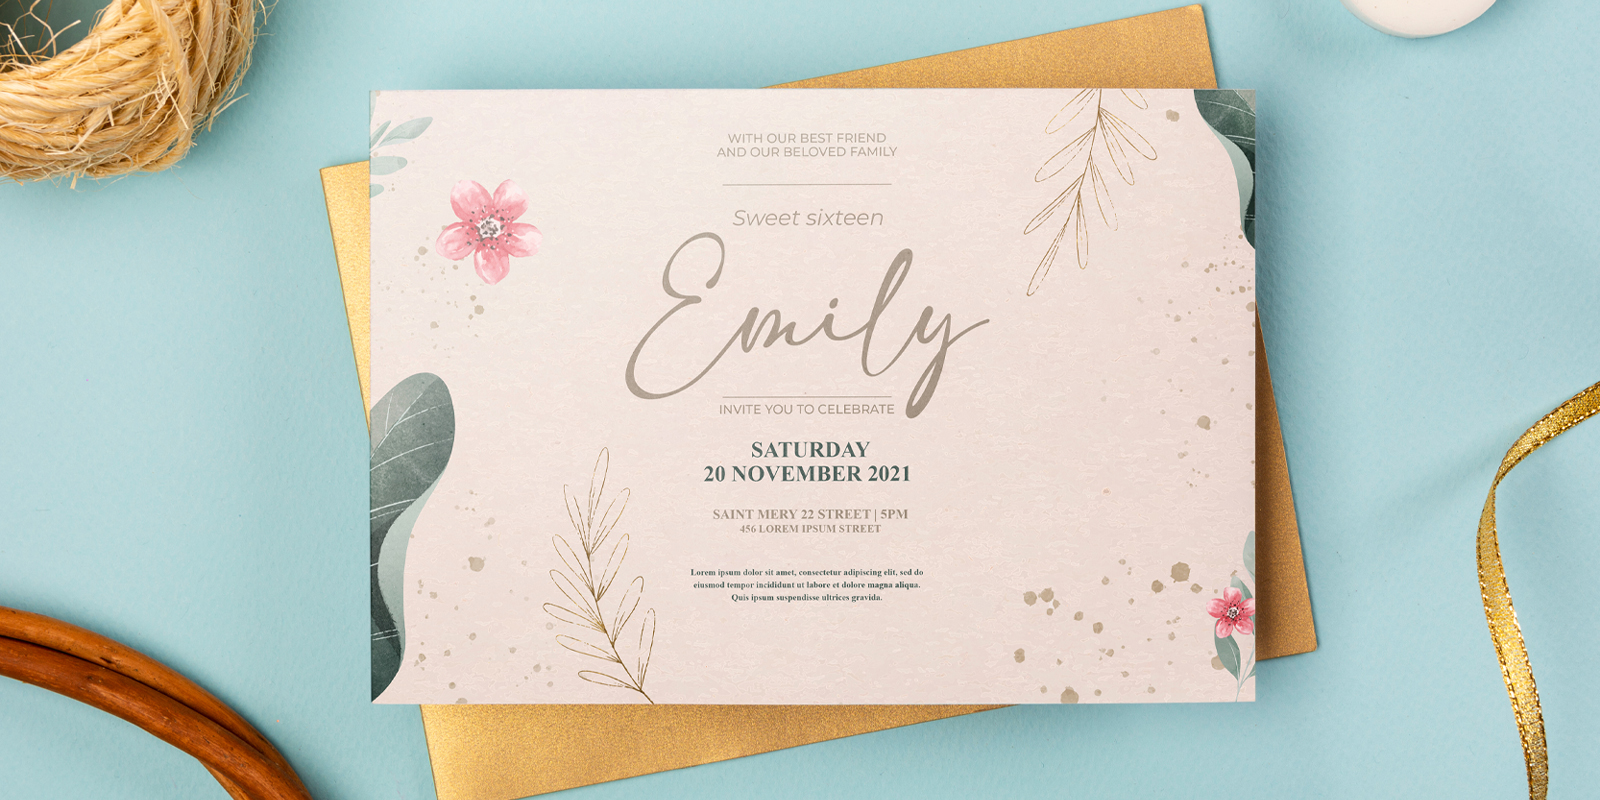 Invitations in Bucharest - Print with Pagerr